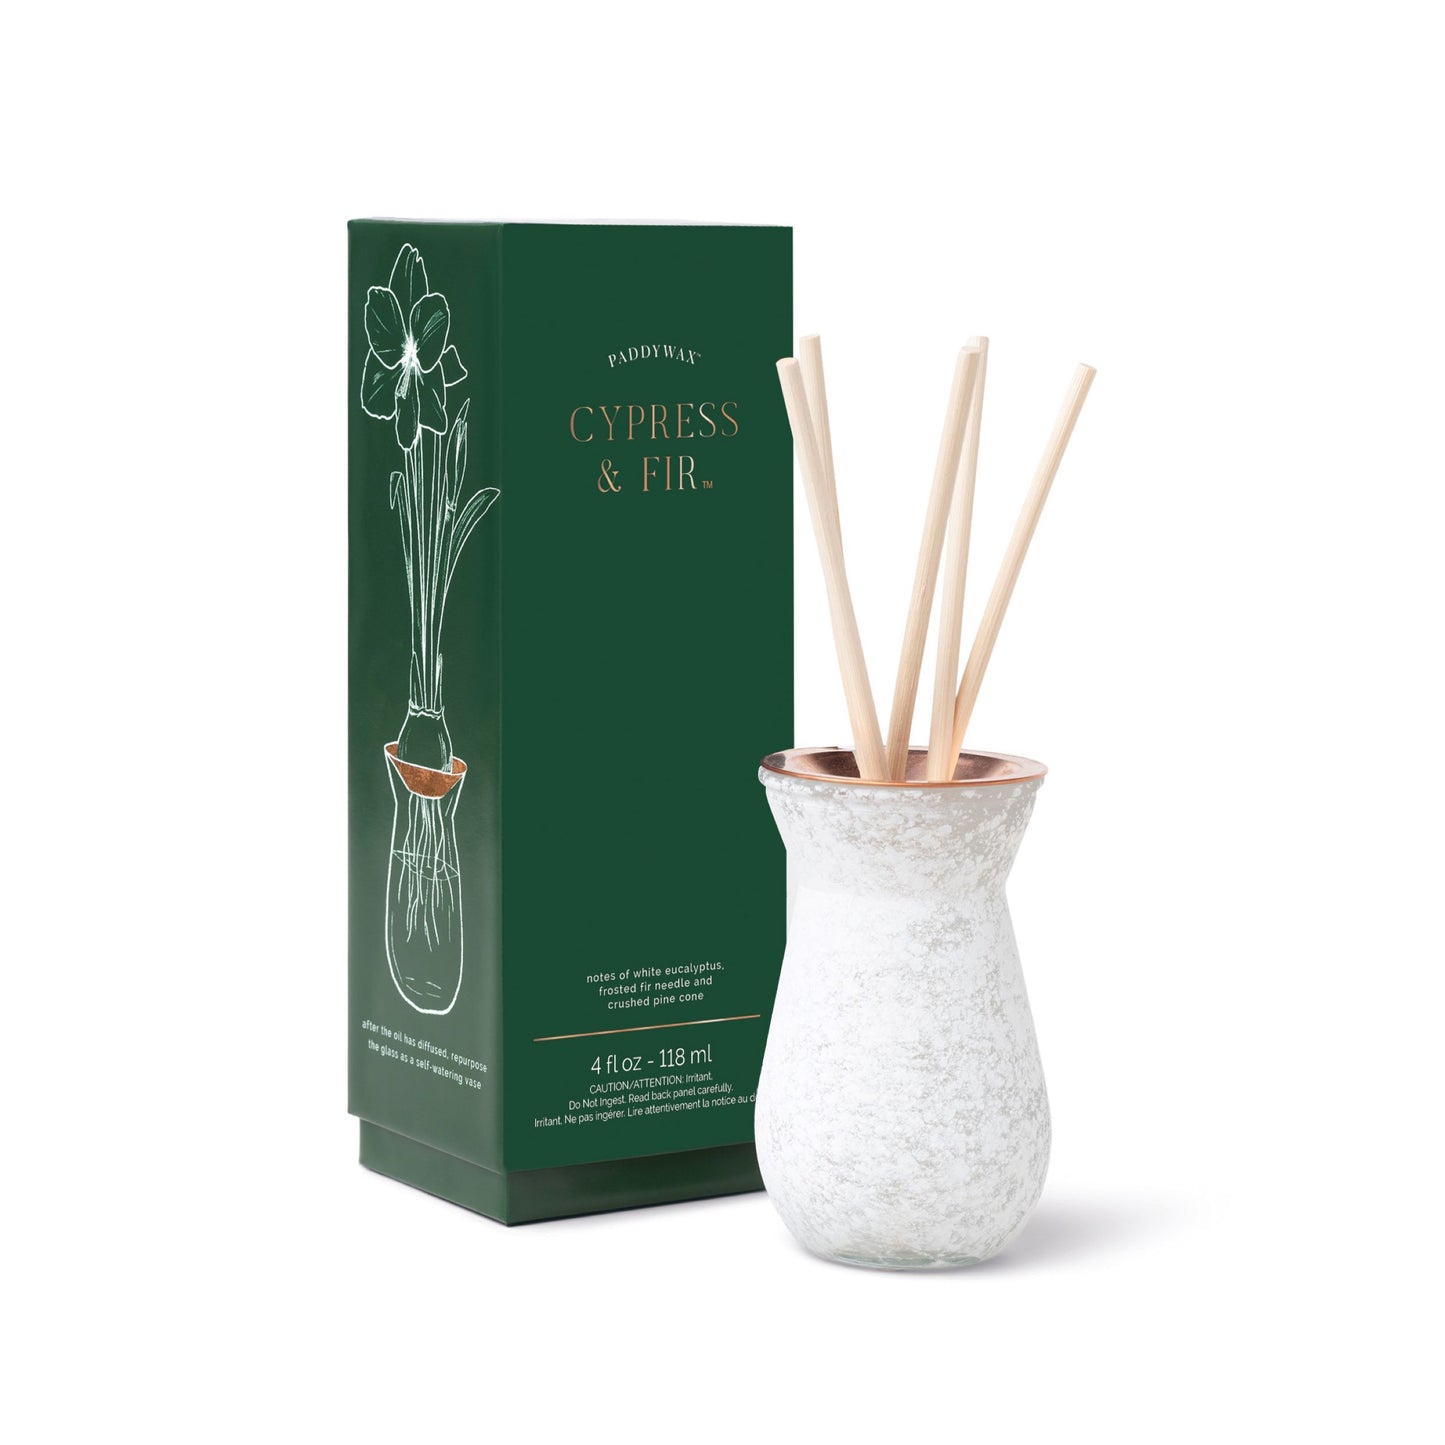 4 oz White Dusted Flora Bulb Diffuser pictured with sticks in it in front of the green box